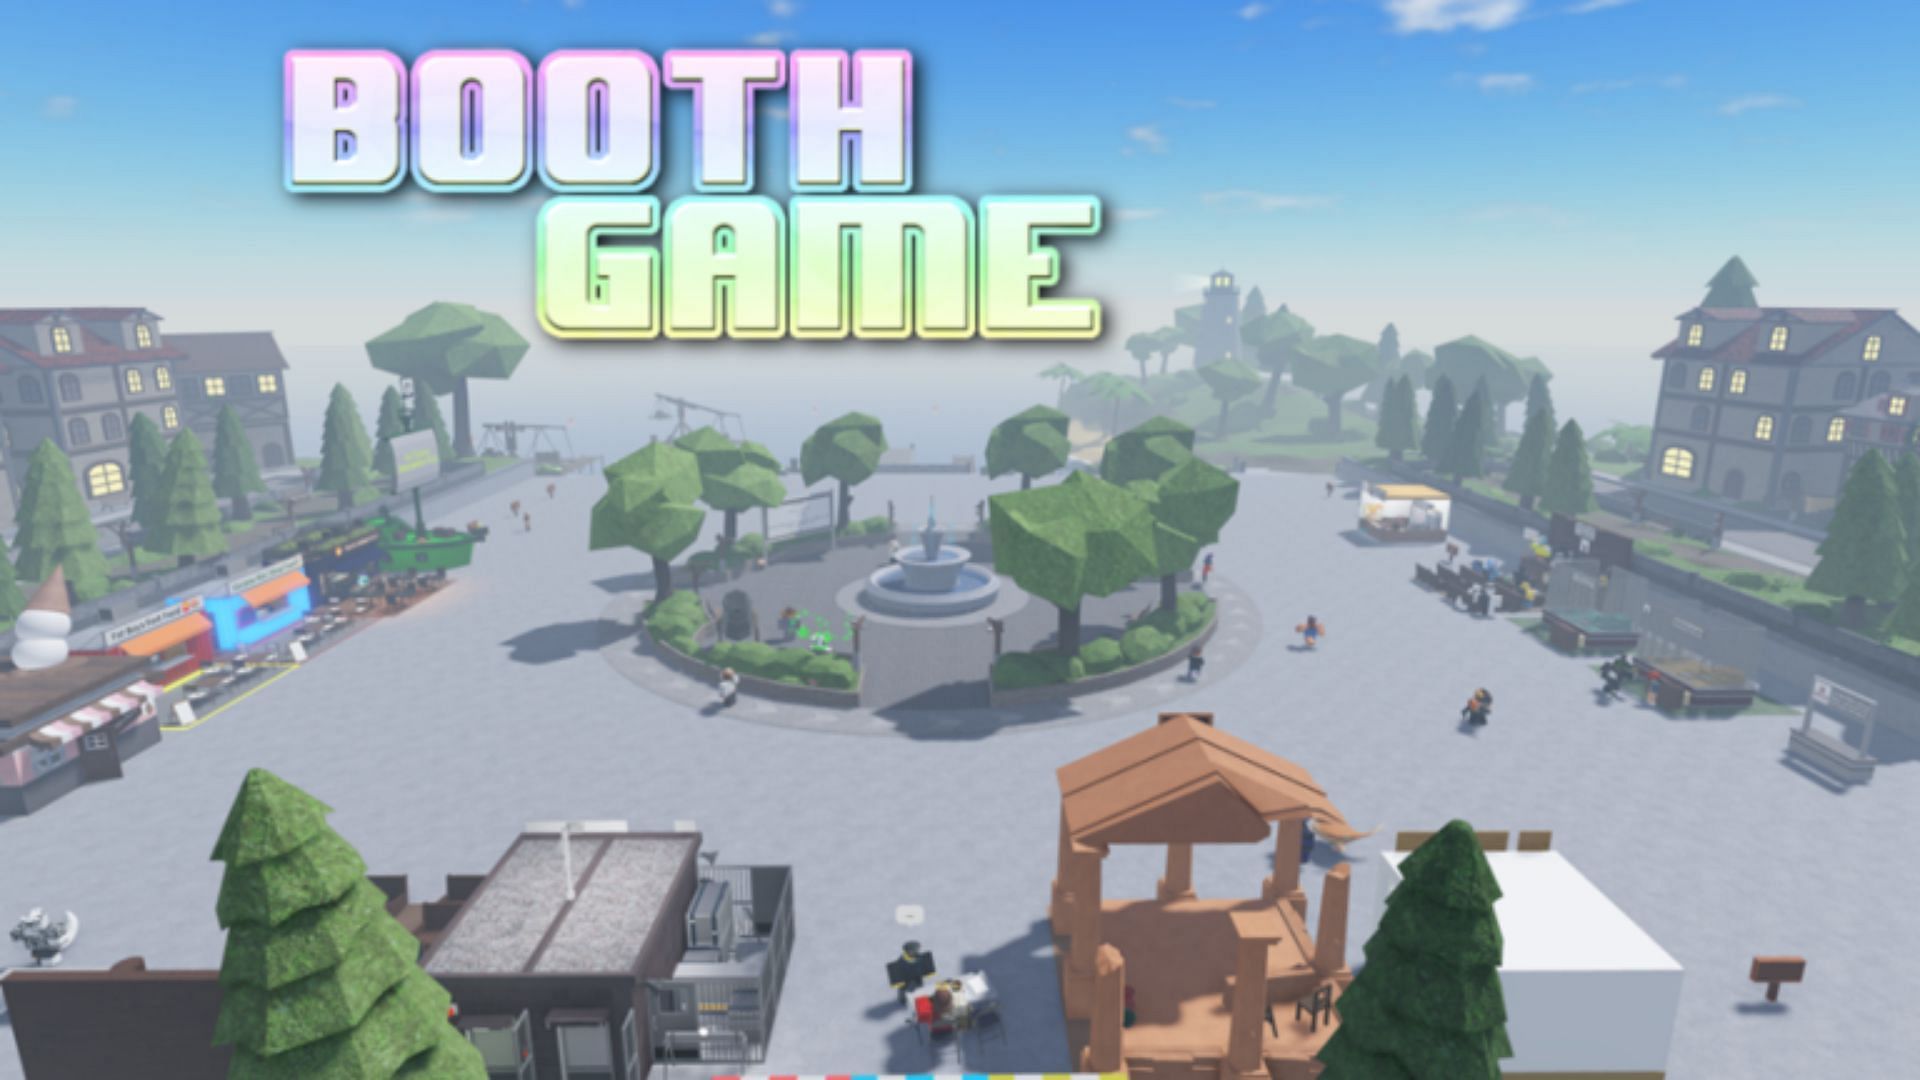 Codes for Booth Game and their importance (Image via Roblox)